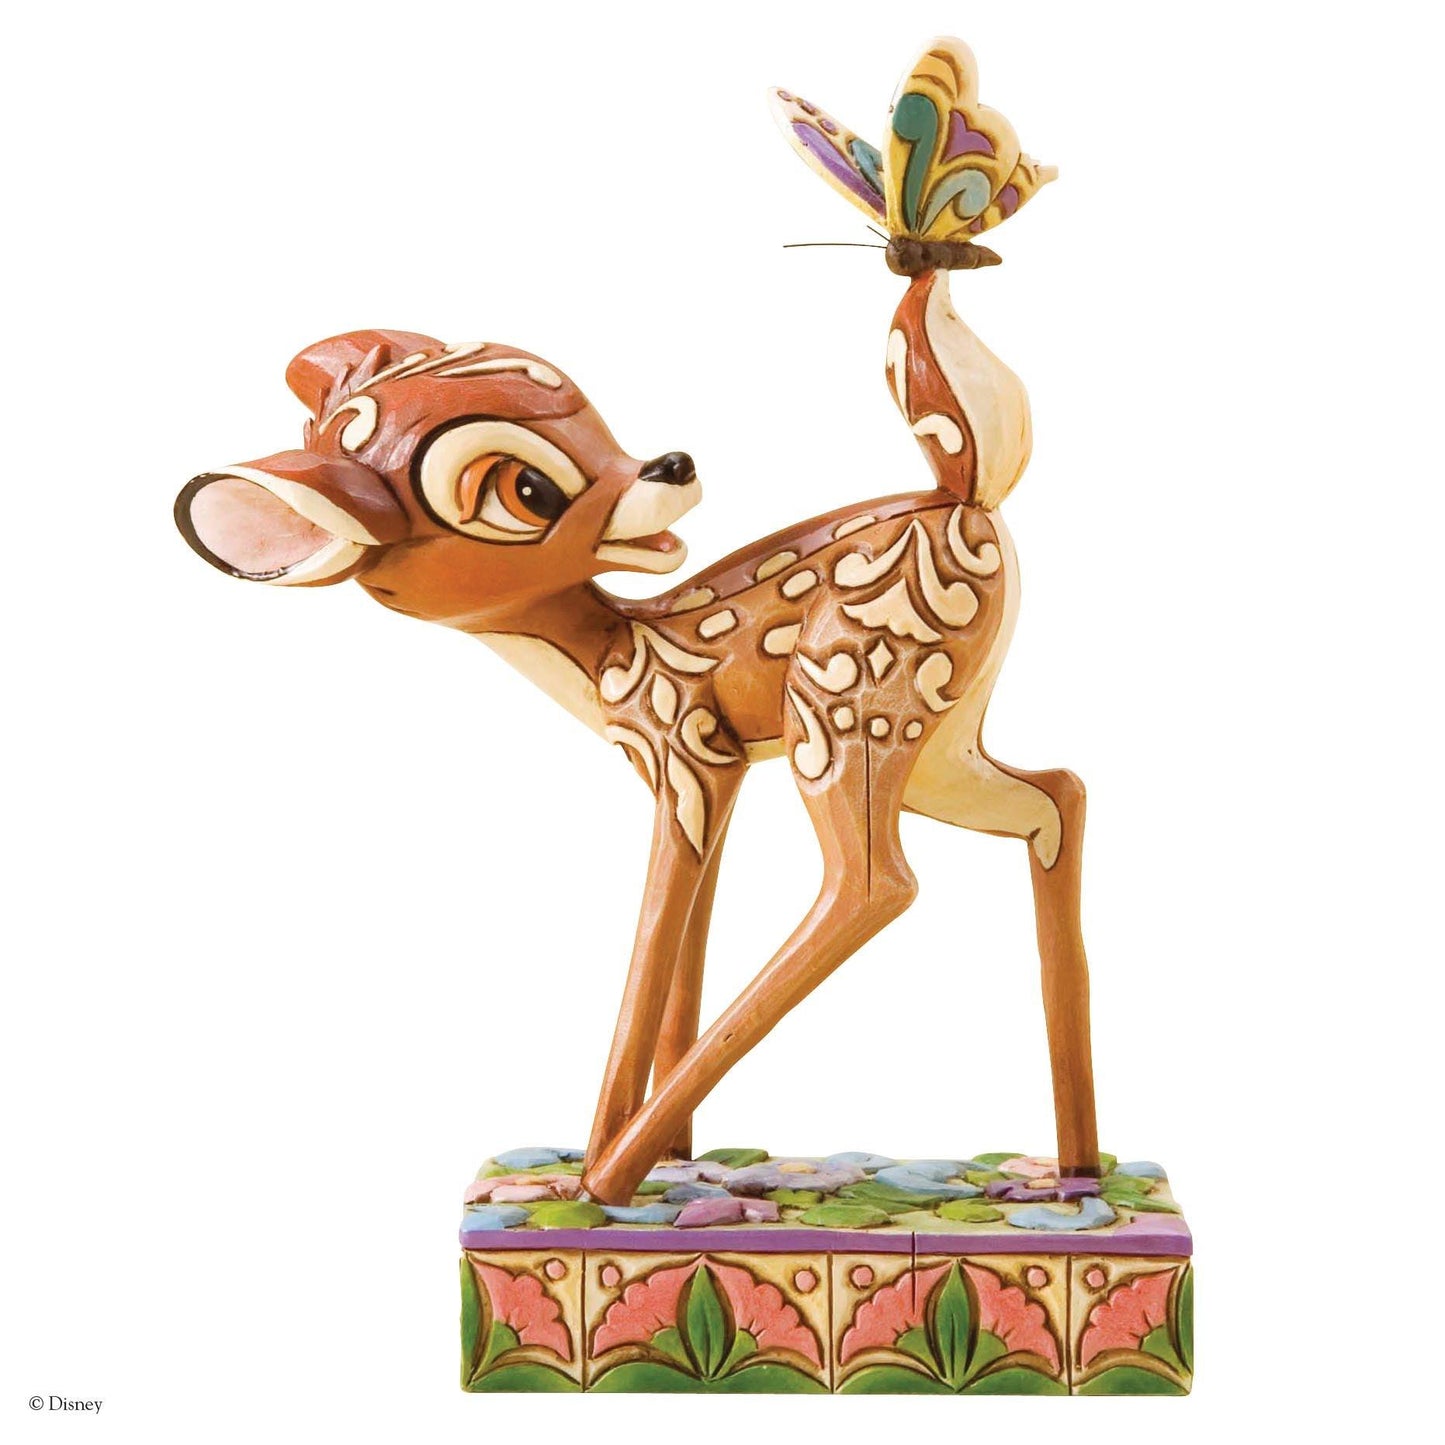 Wonder of Spring (Bambi Figurine) (Disney Traditions by Jim Shore) - Gallery Gifts Online 